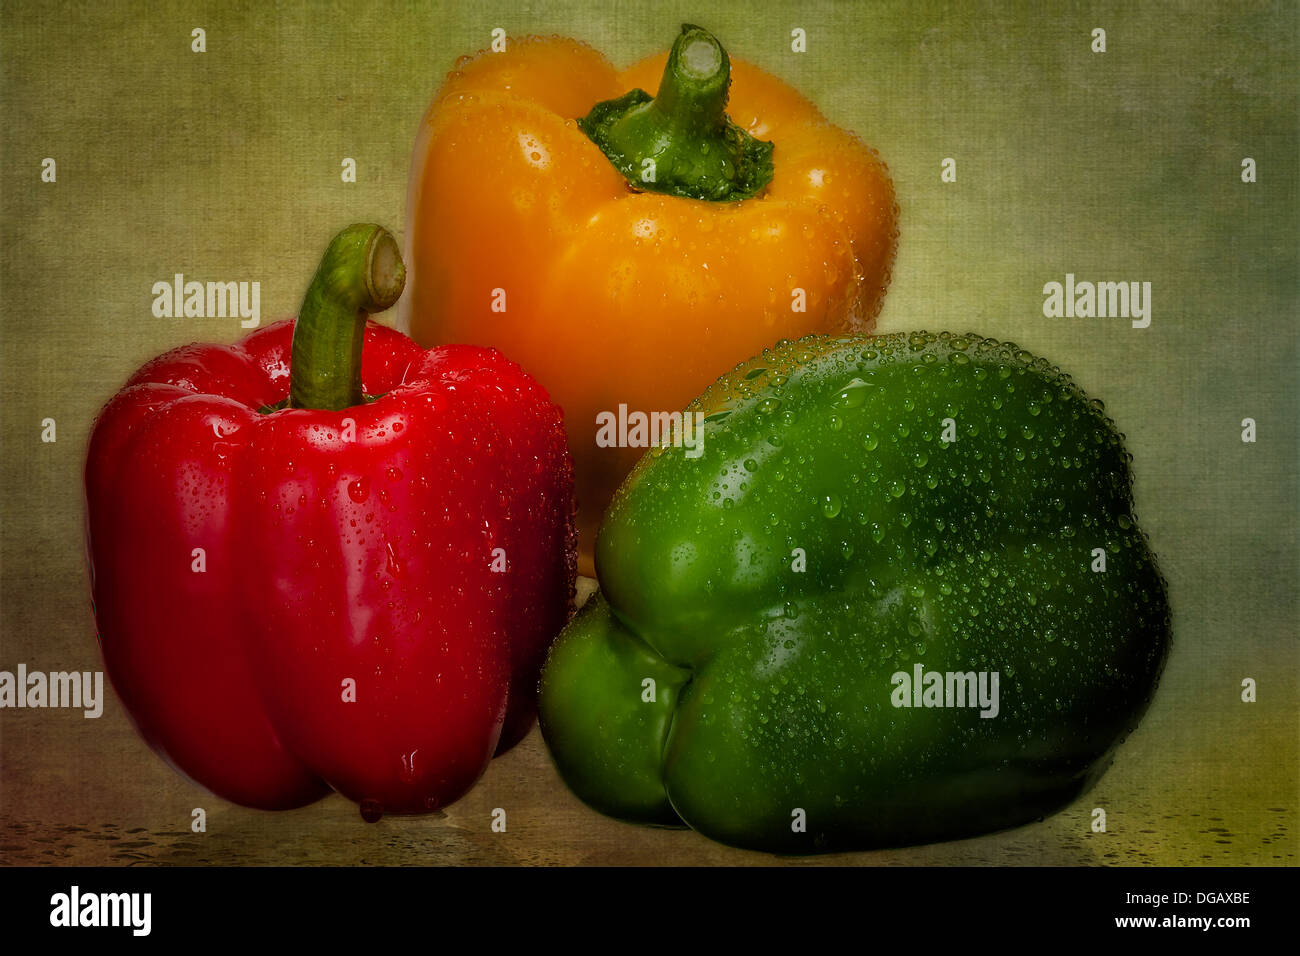 Still life photograph of recently washed fresh red, green and yellow bell peppers. Stock Photo